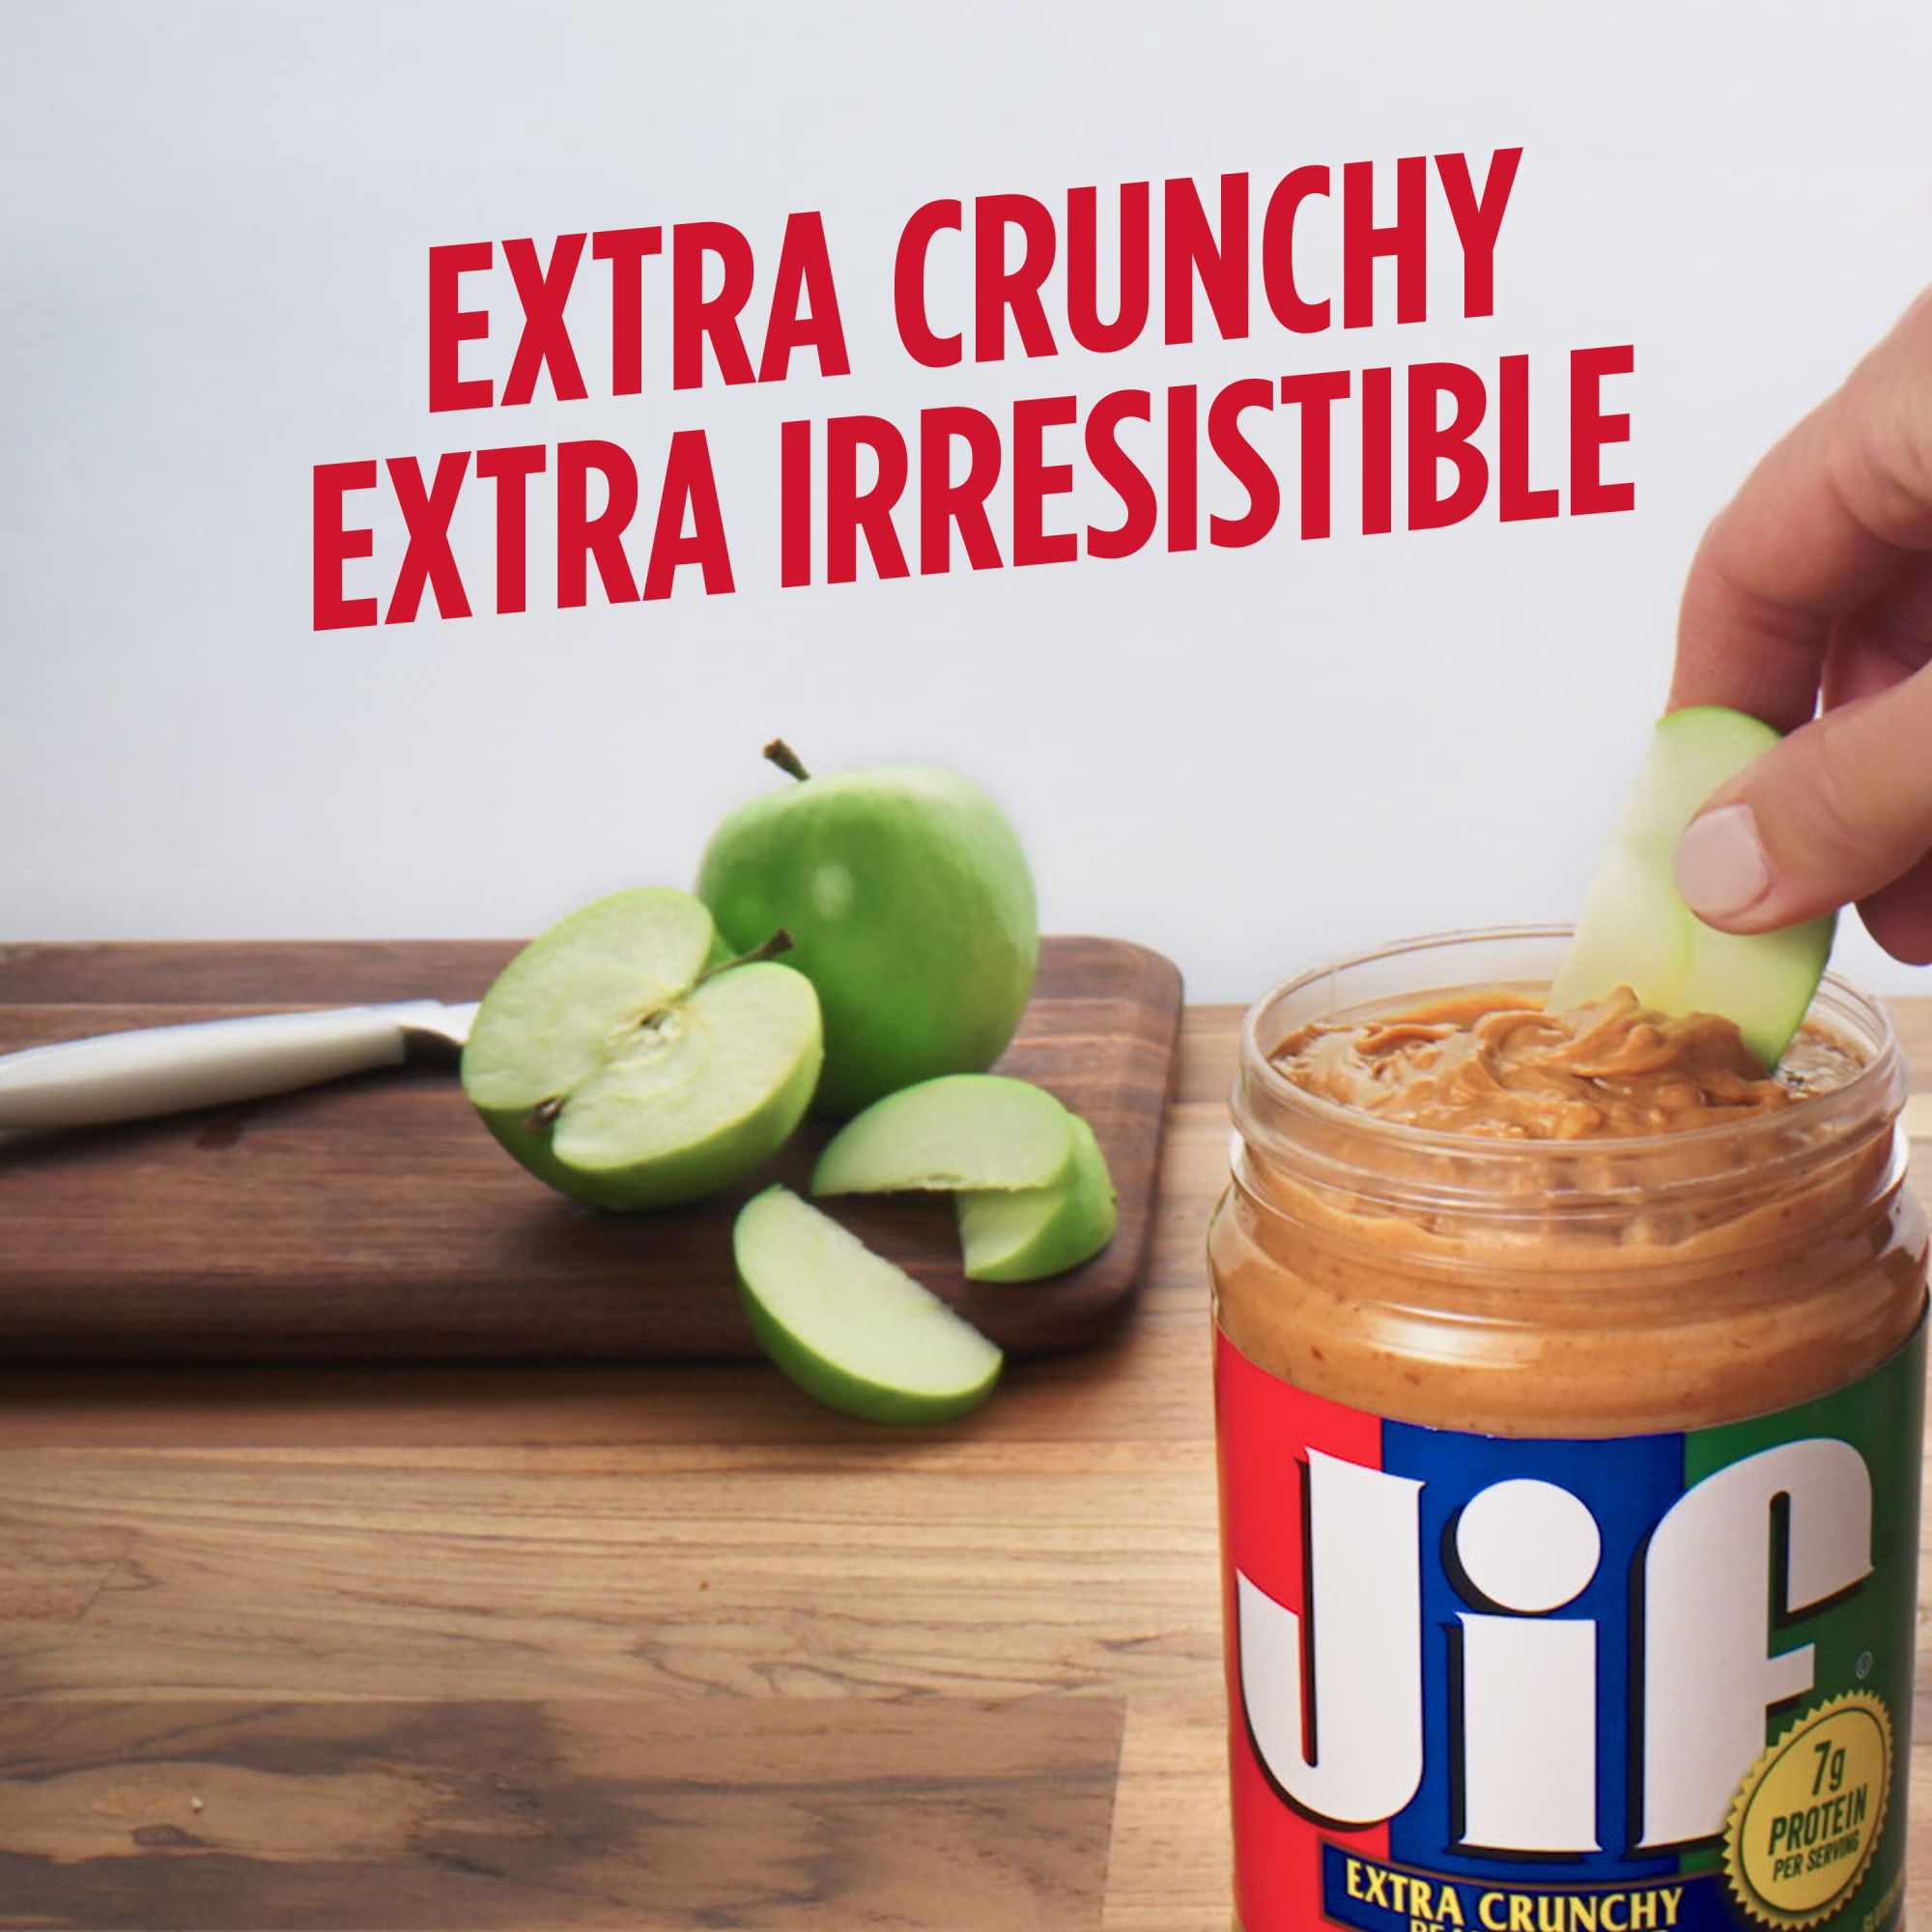 Jif Extra Crunchy Peanut Butter, 40-Ounce Jar - image 5 of 8